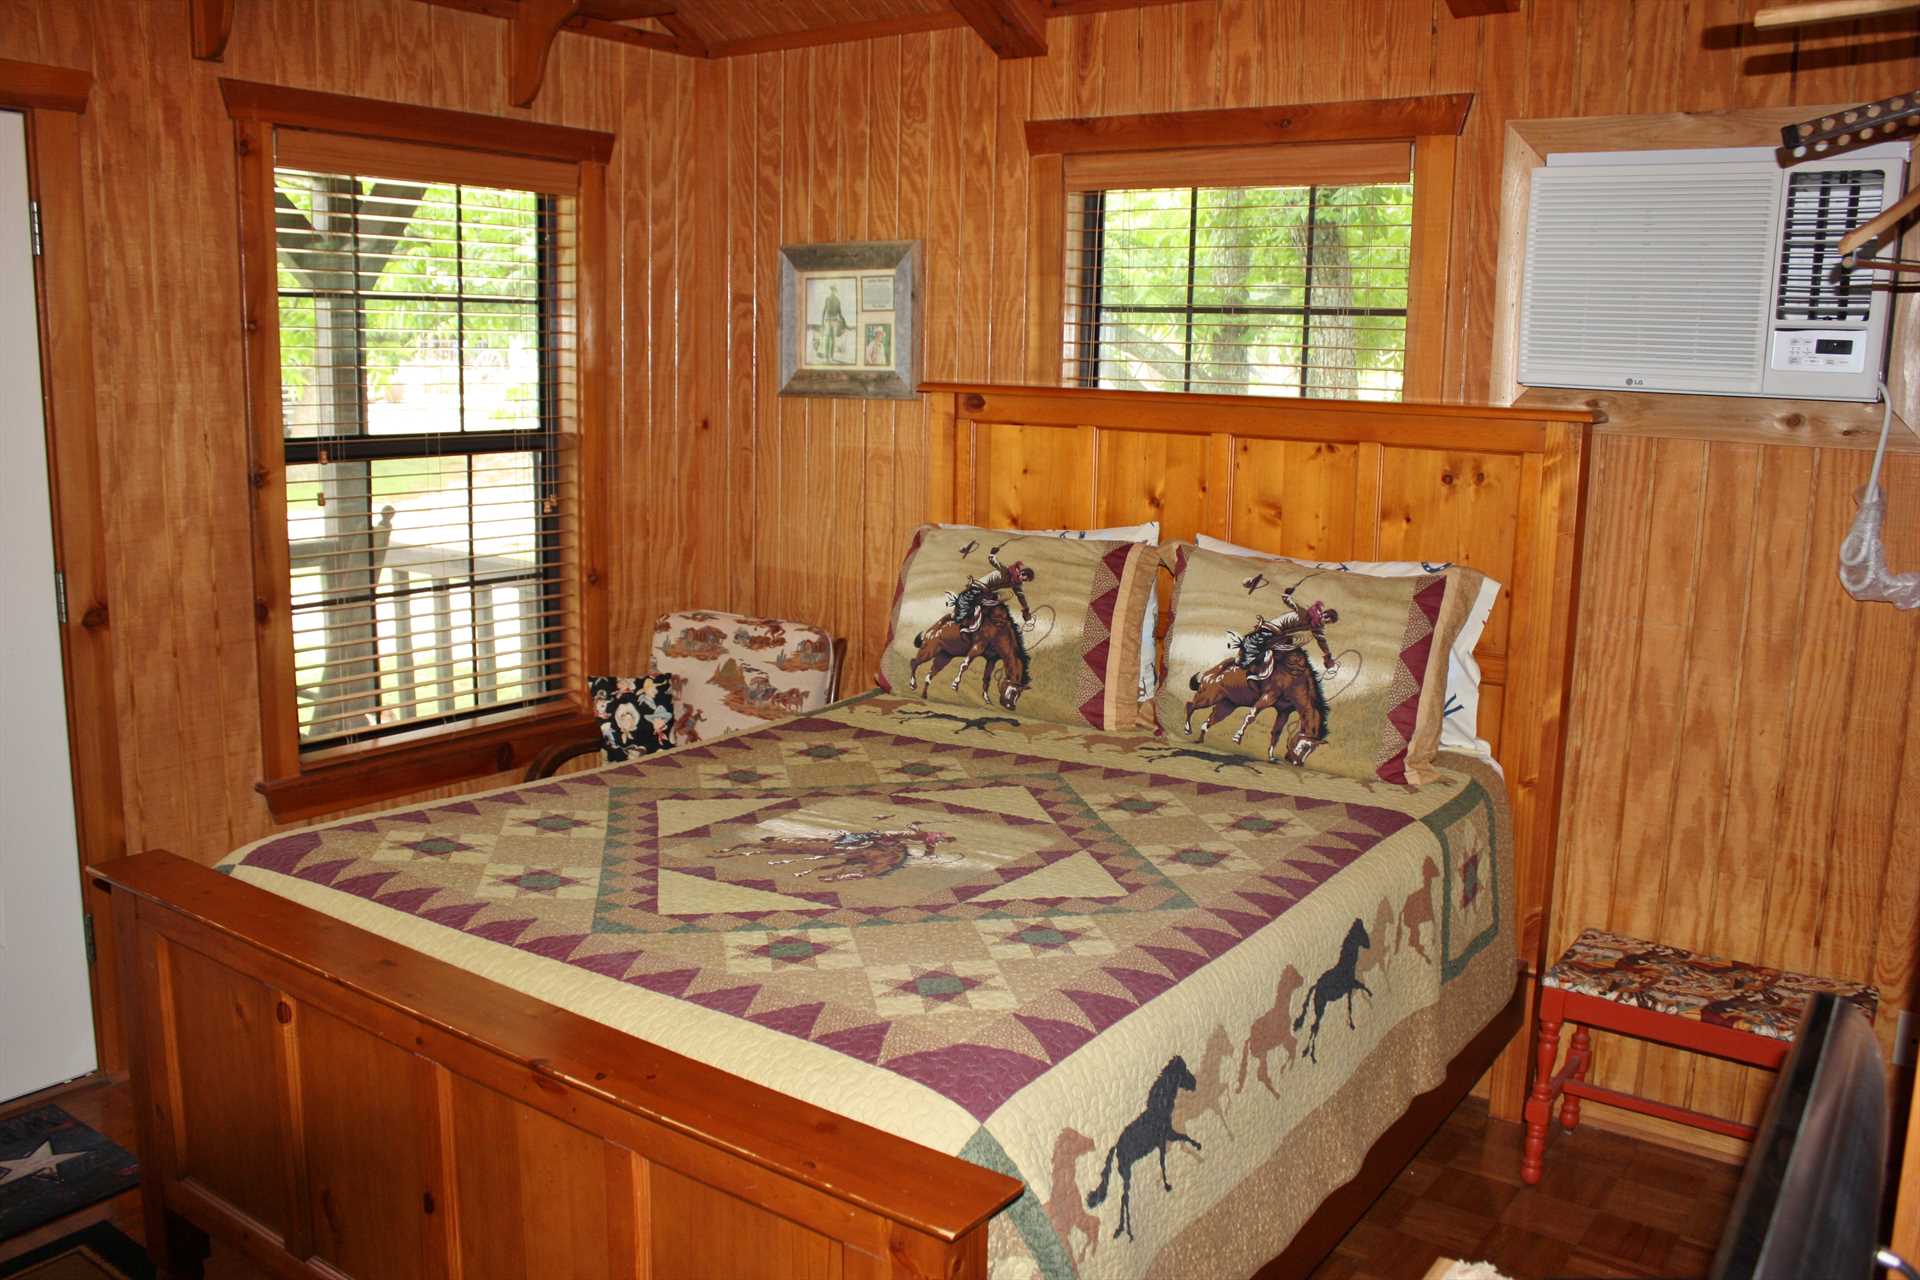                                                 The framework of the huge and comfy queen bed matches the gorgeous woodwork you'll find throughout the cabin.